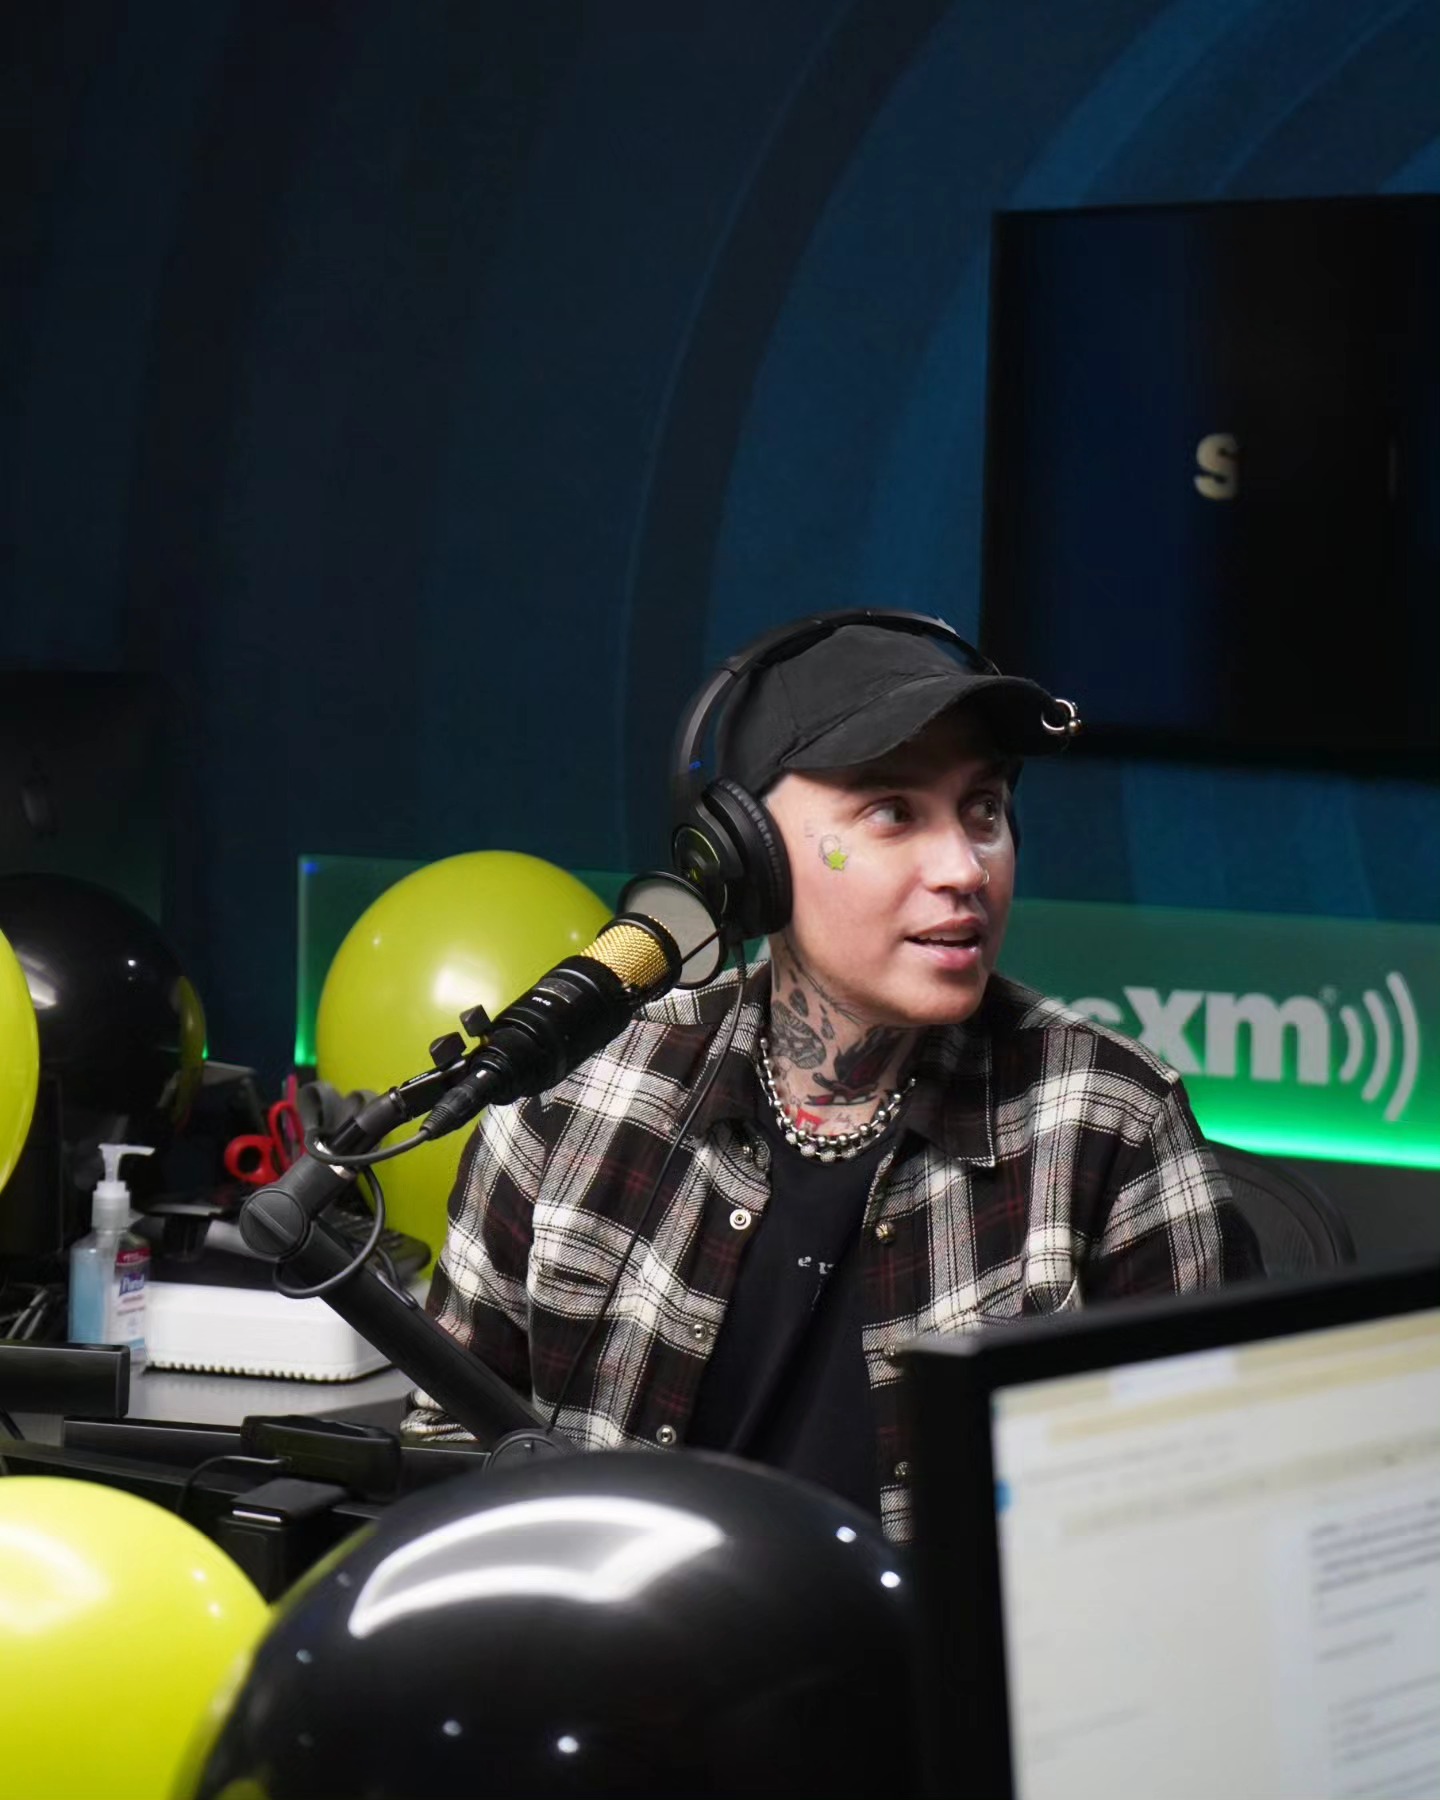 Mike Posner & blackbear sat down with SiriusXM Hist 1 to talk about their new album Mansionz 2.
